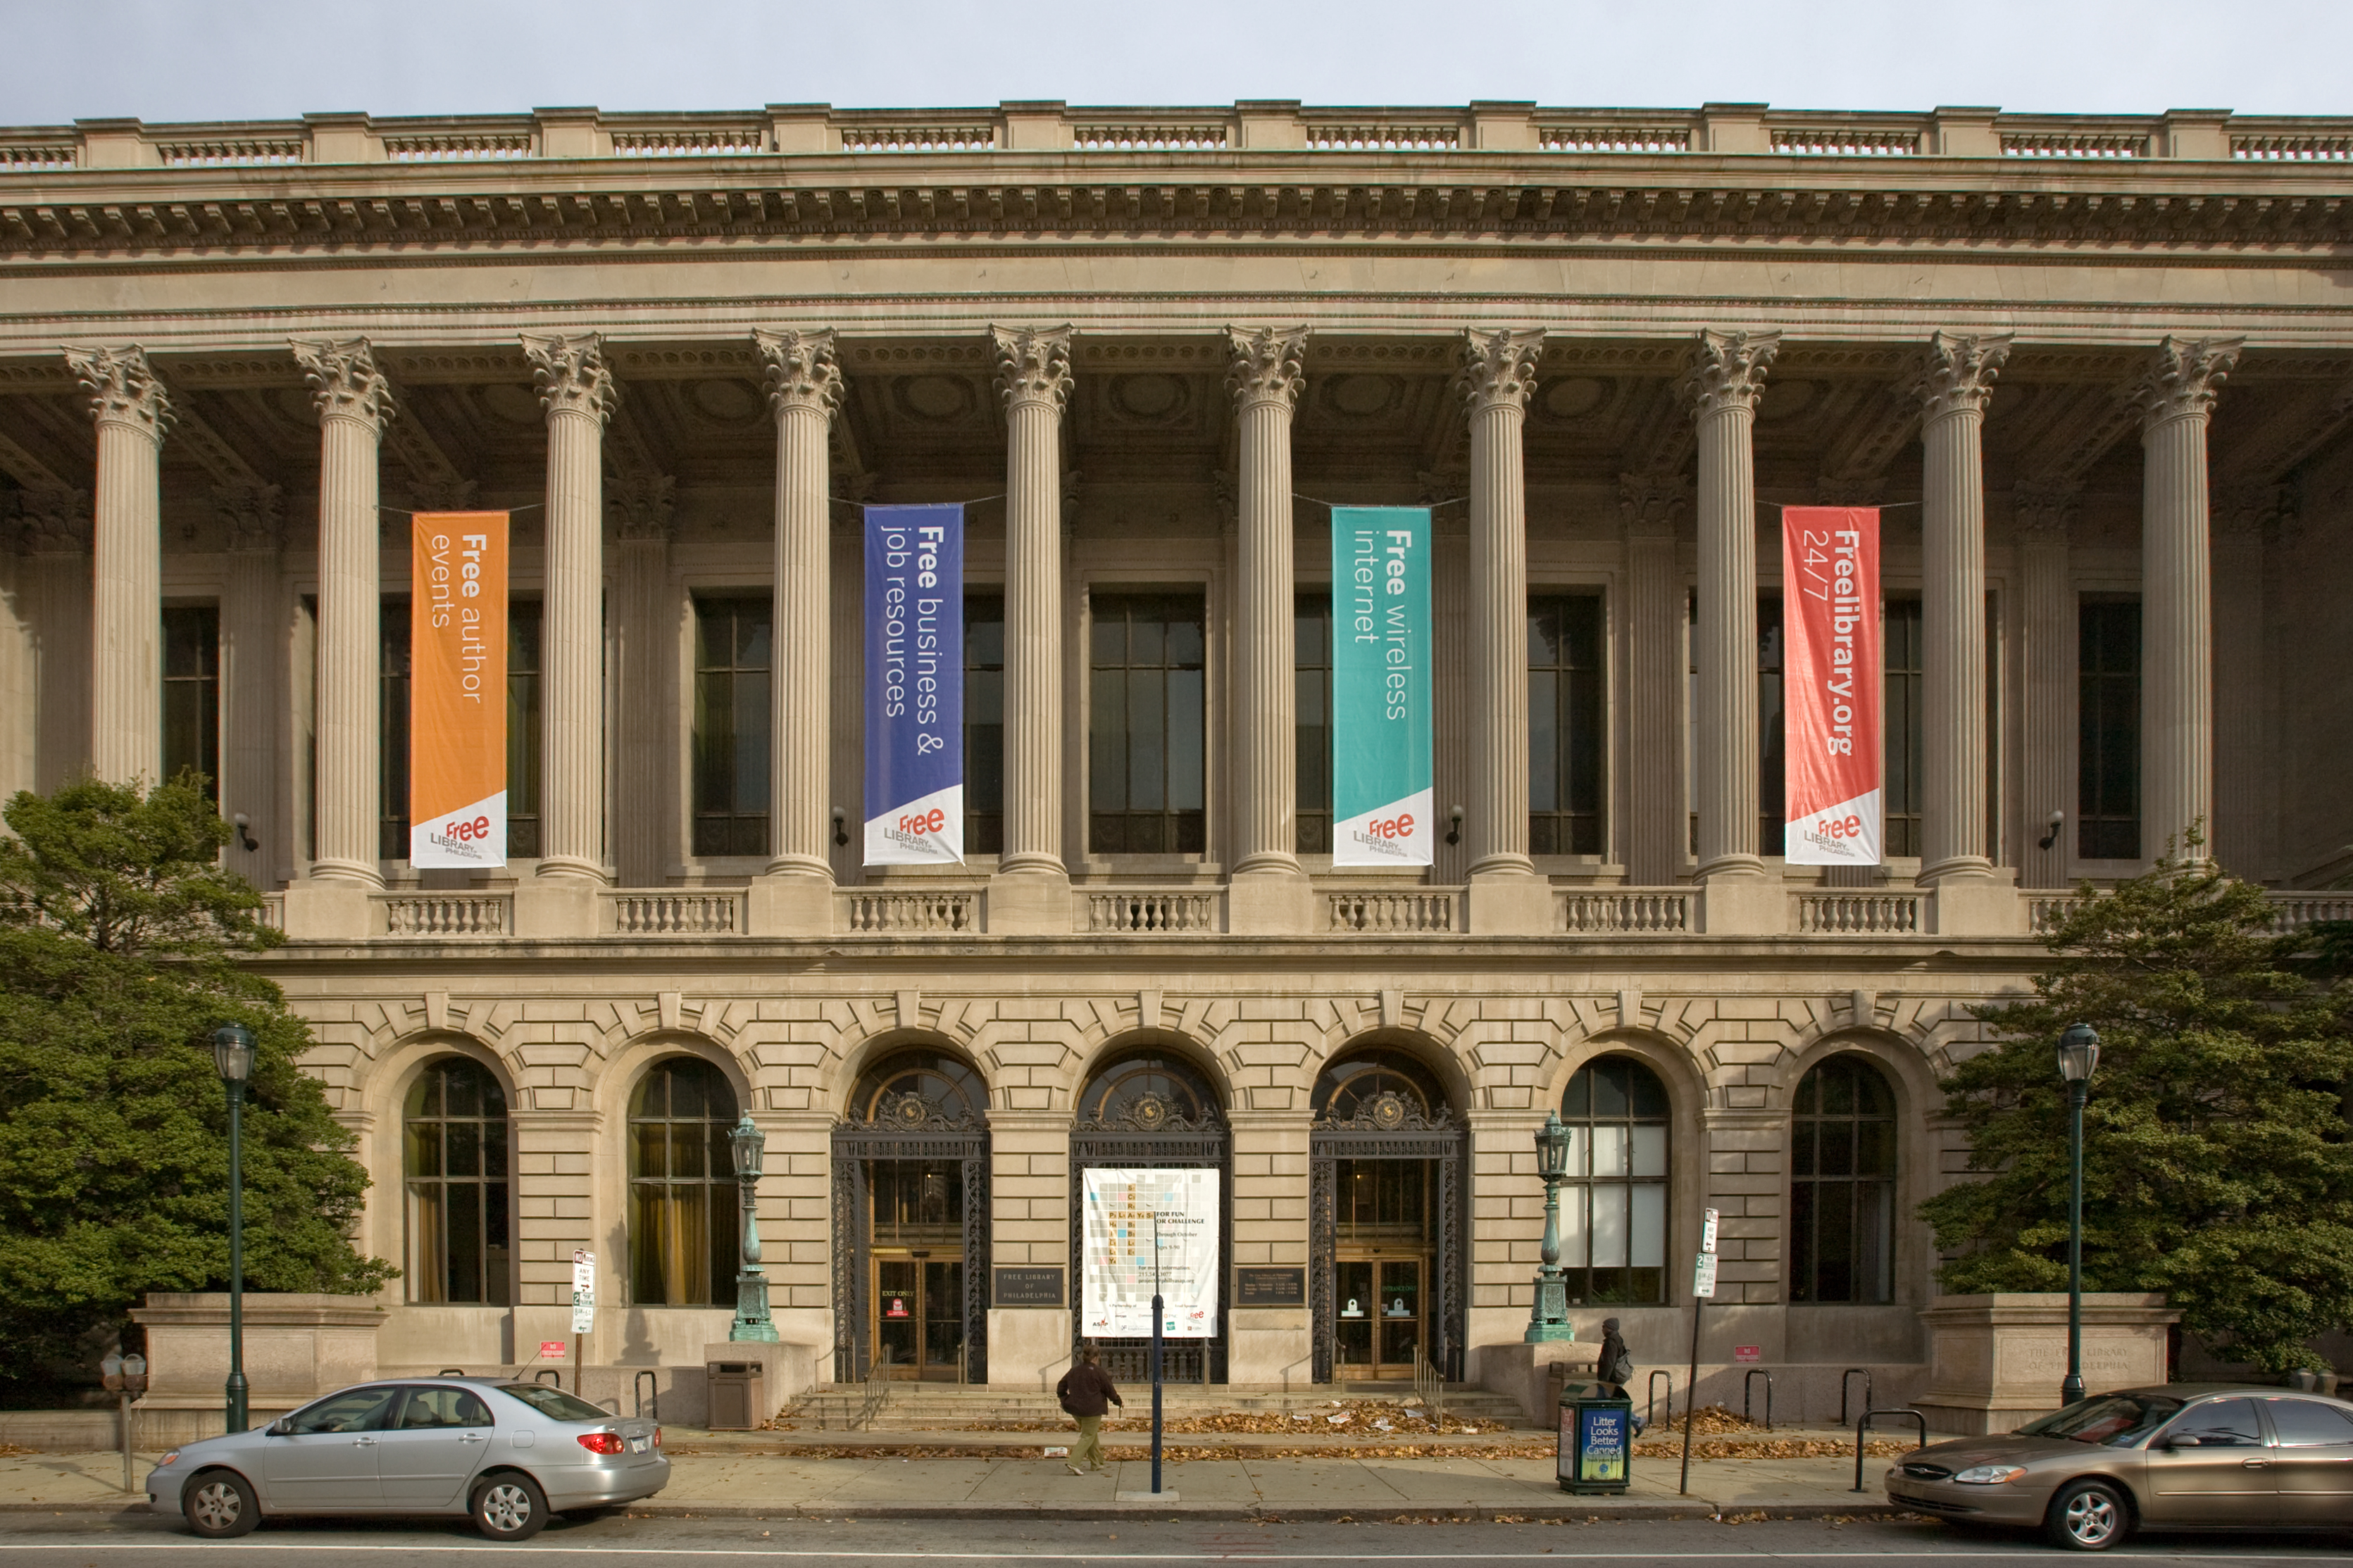 Banners hang in front of the Parkway Central branch of the Free Library of Philadelphia.